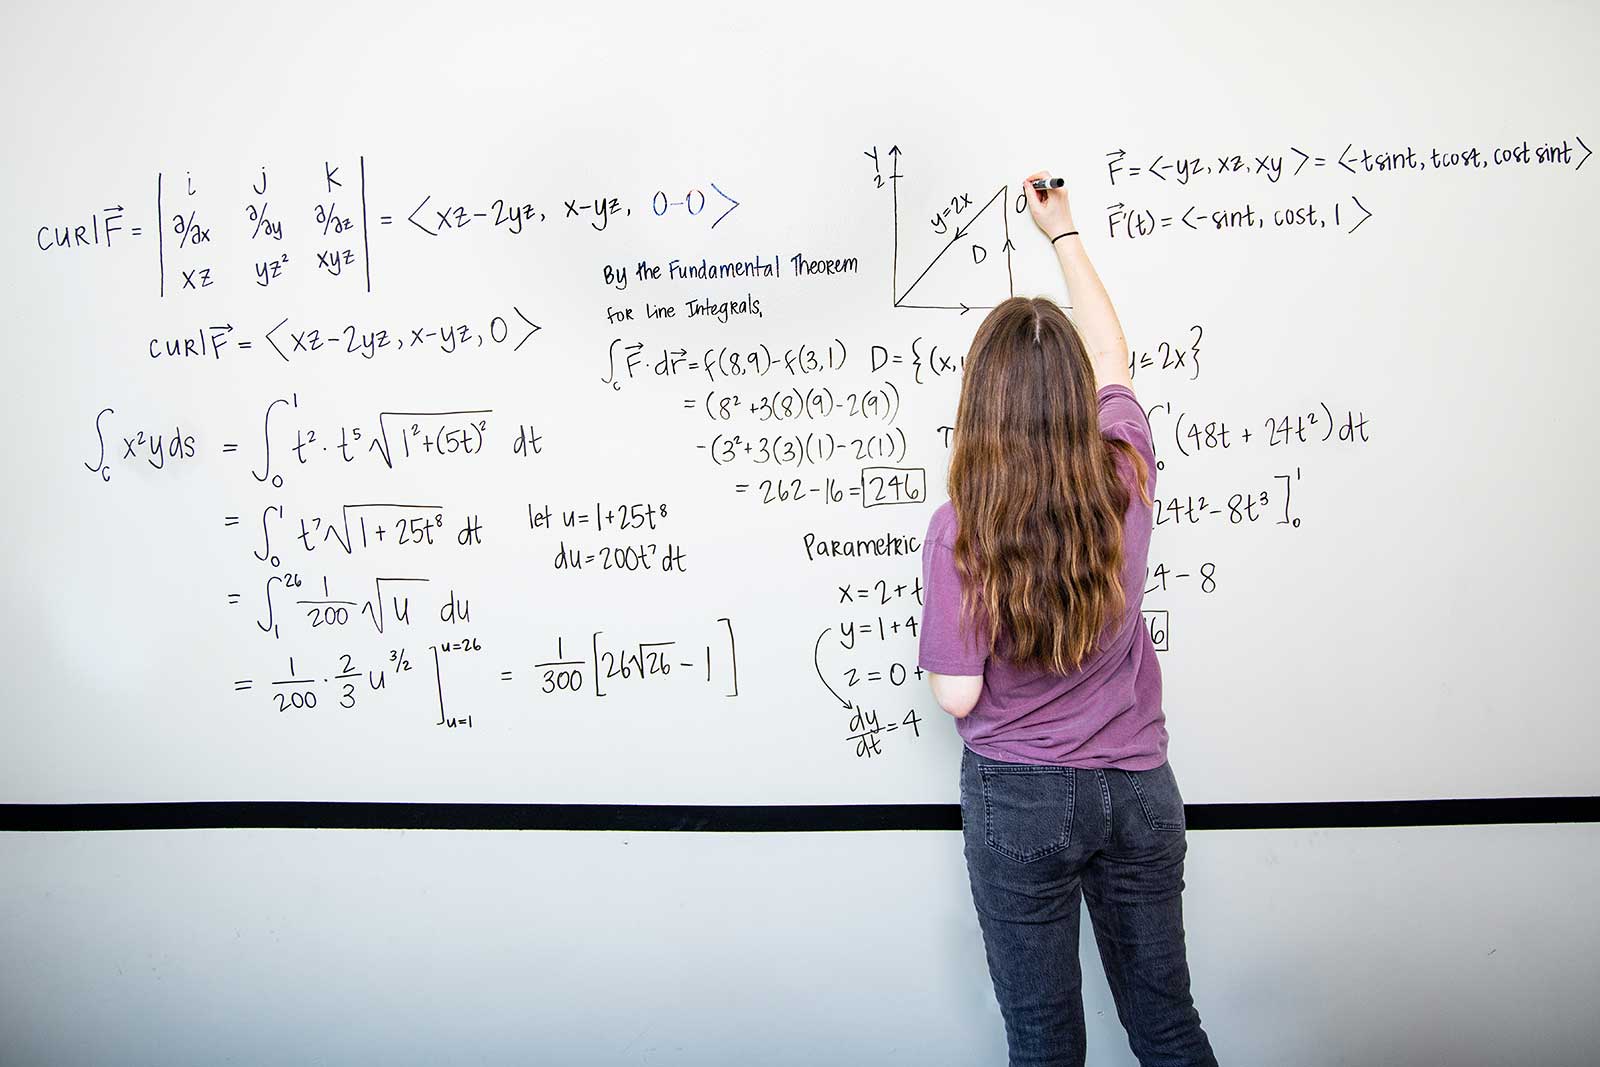 Student solving equations on white board